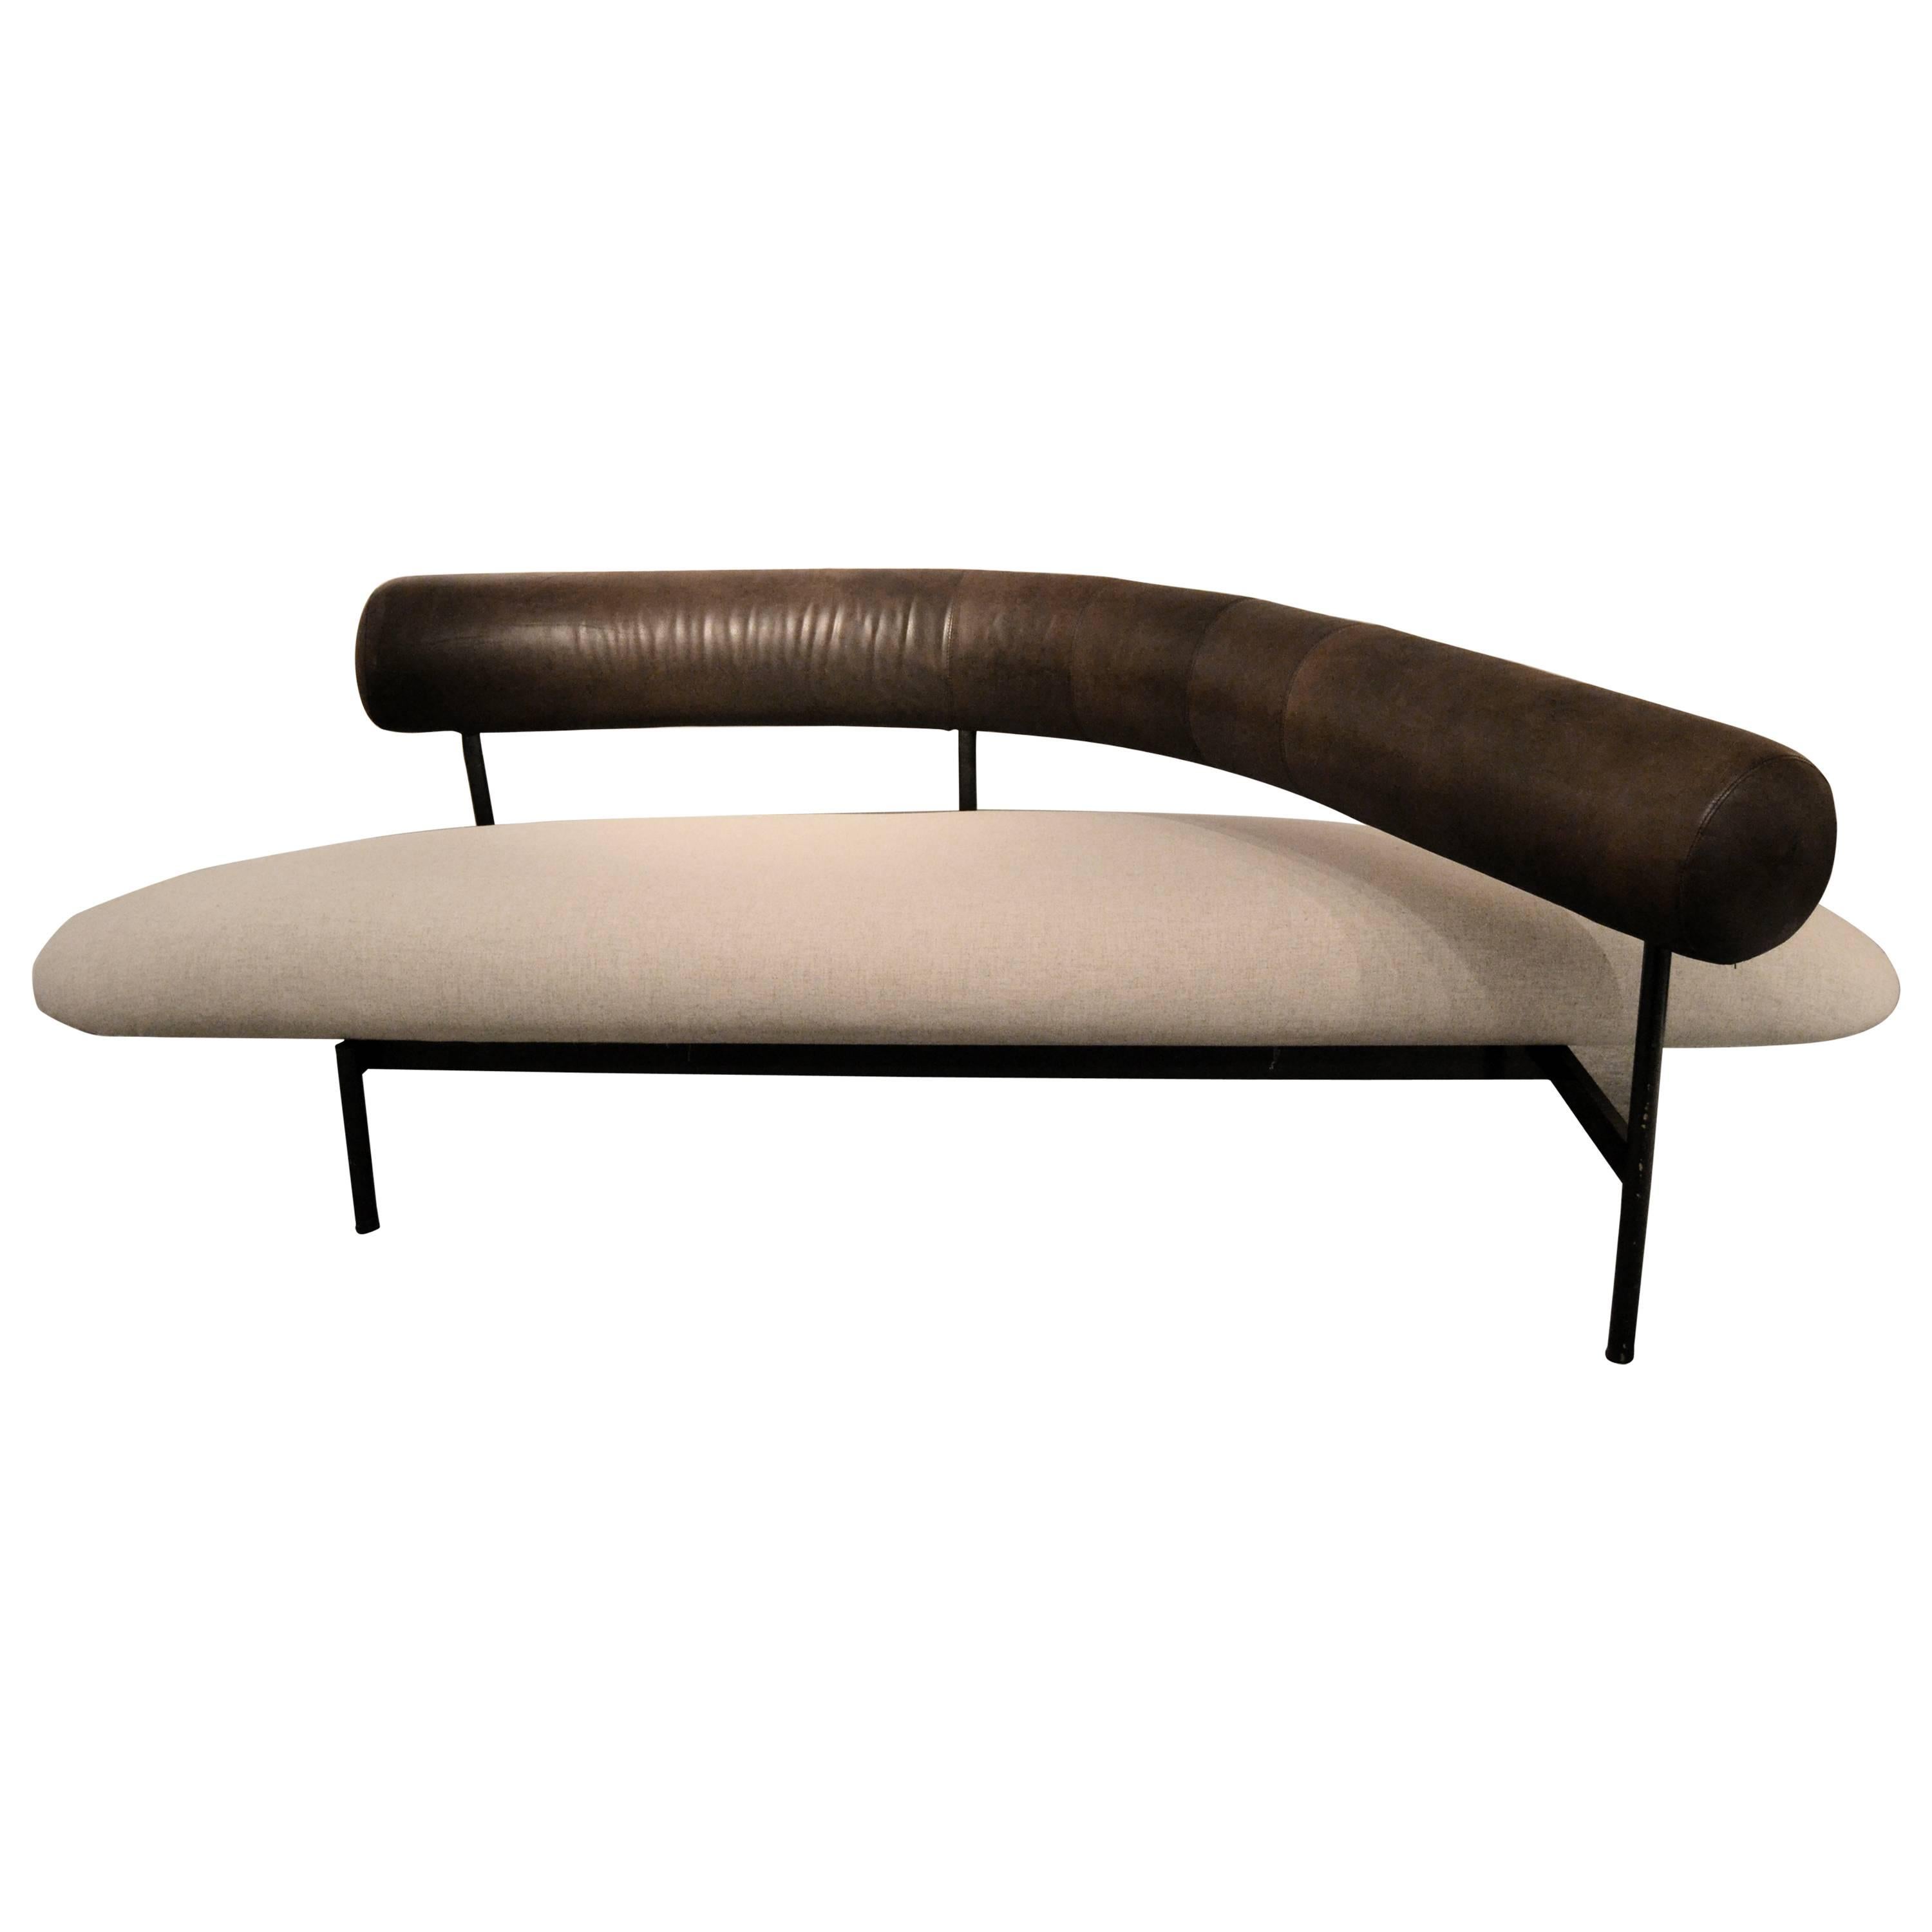 1985 Sofa by Javier Mariscal